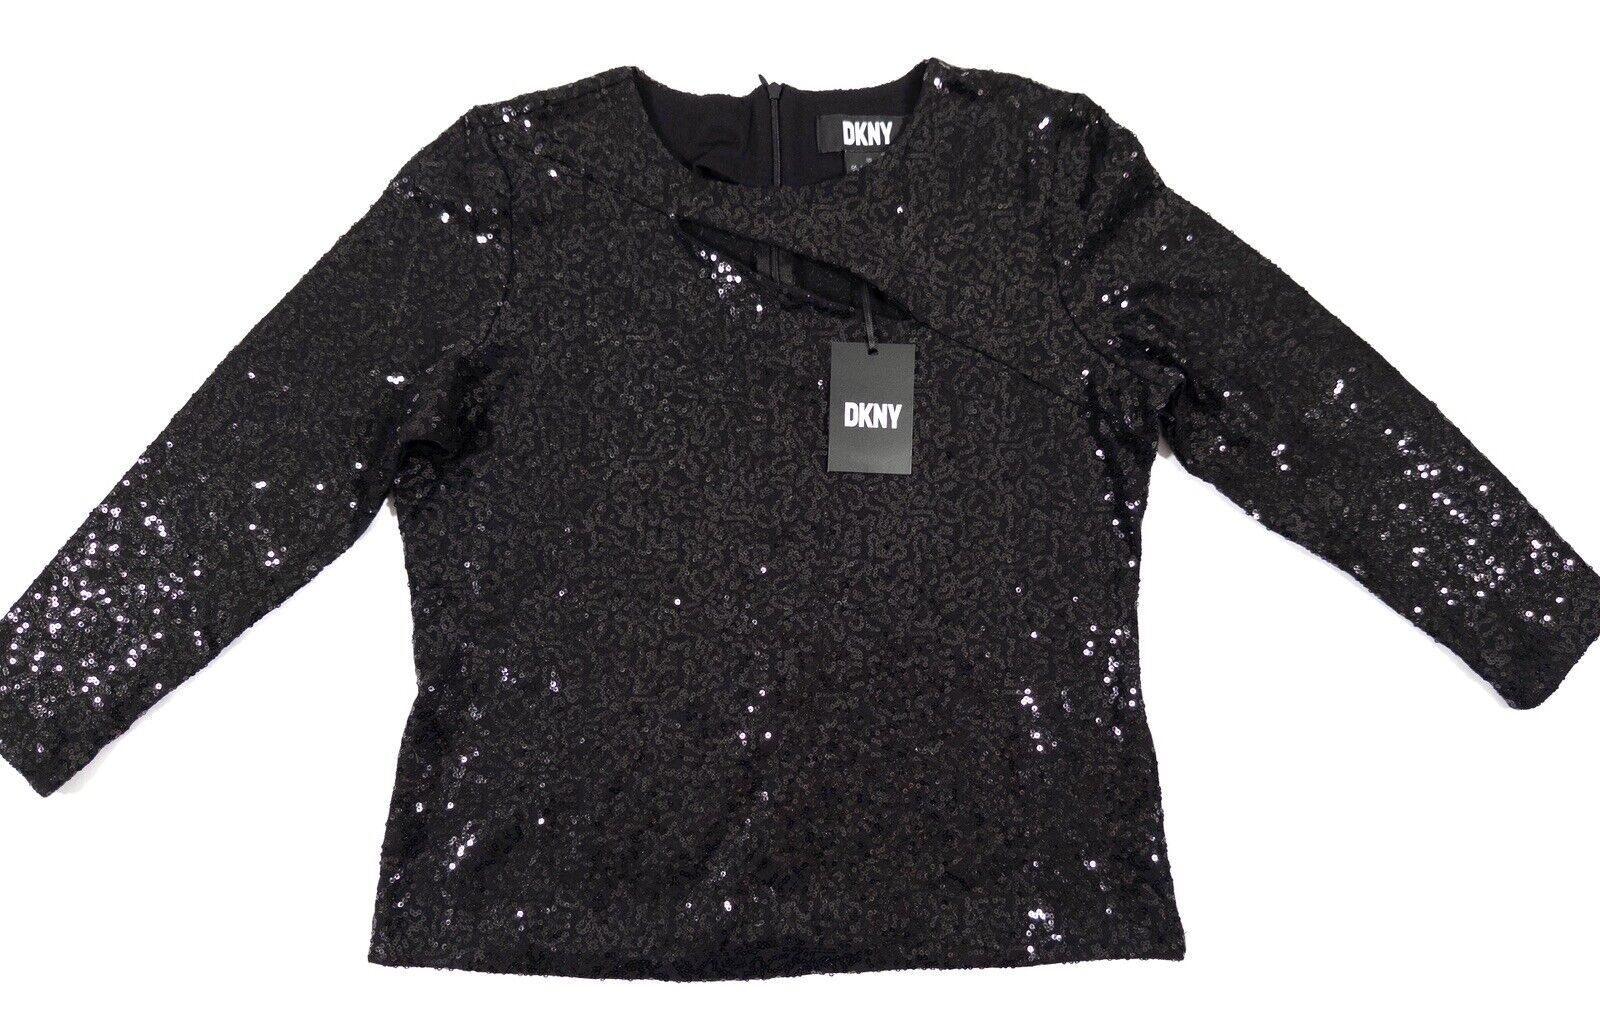 DKNY Women's Black Sequin Blouse Top Size UK Small